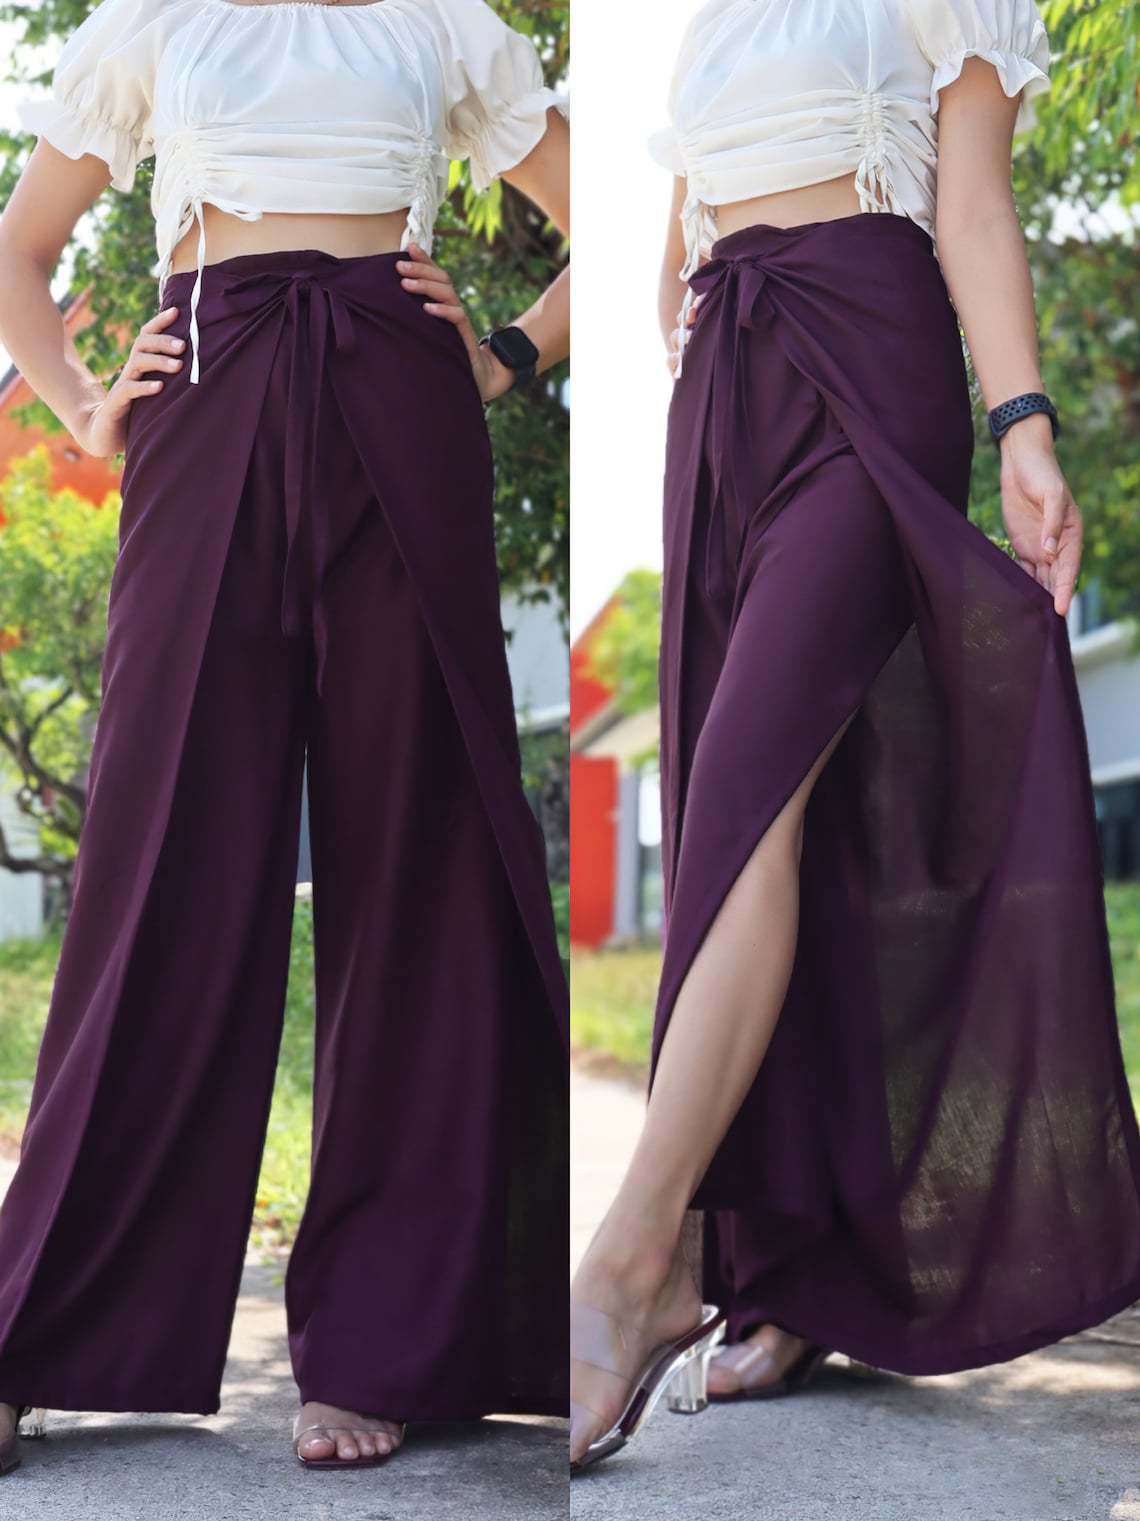 Boho-style deep purple wrap pants with a white cropped top, showcasing the front and side views with a natural outdoor backdrop